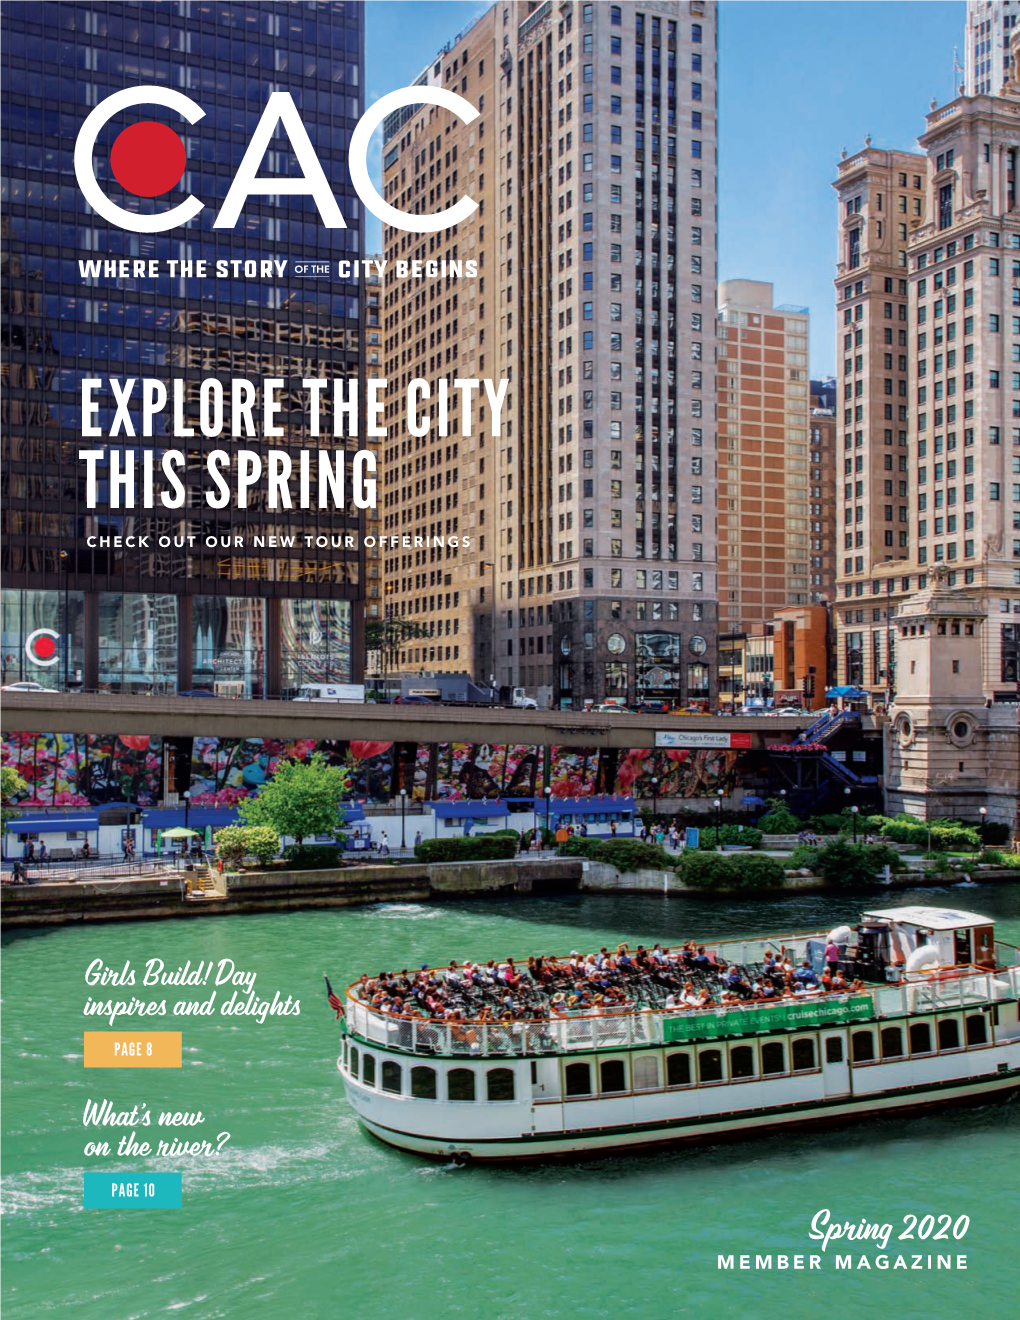 Explore the City This Spring Check out Our New Tour Offerings